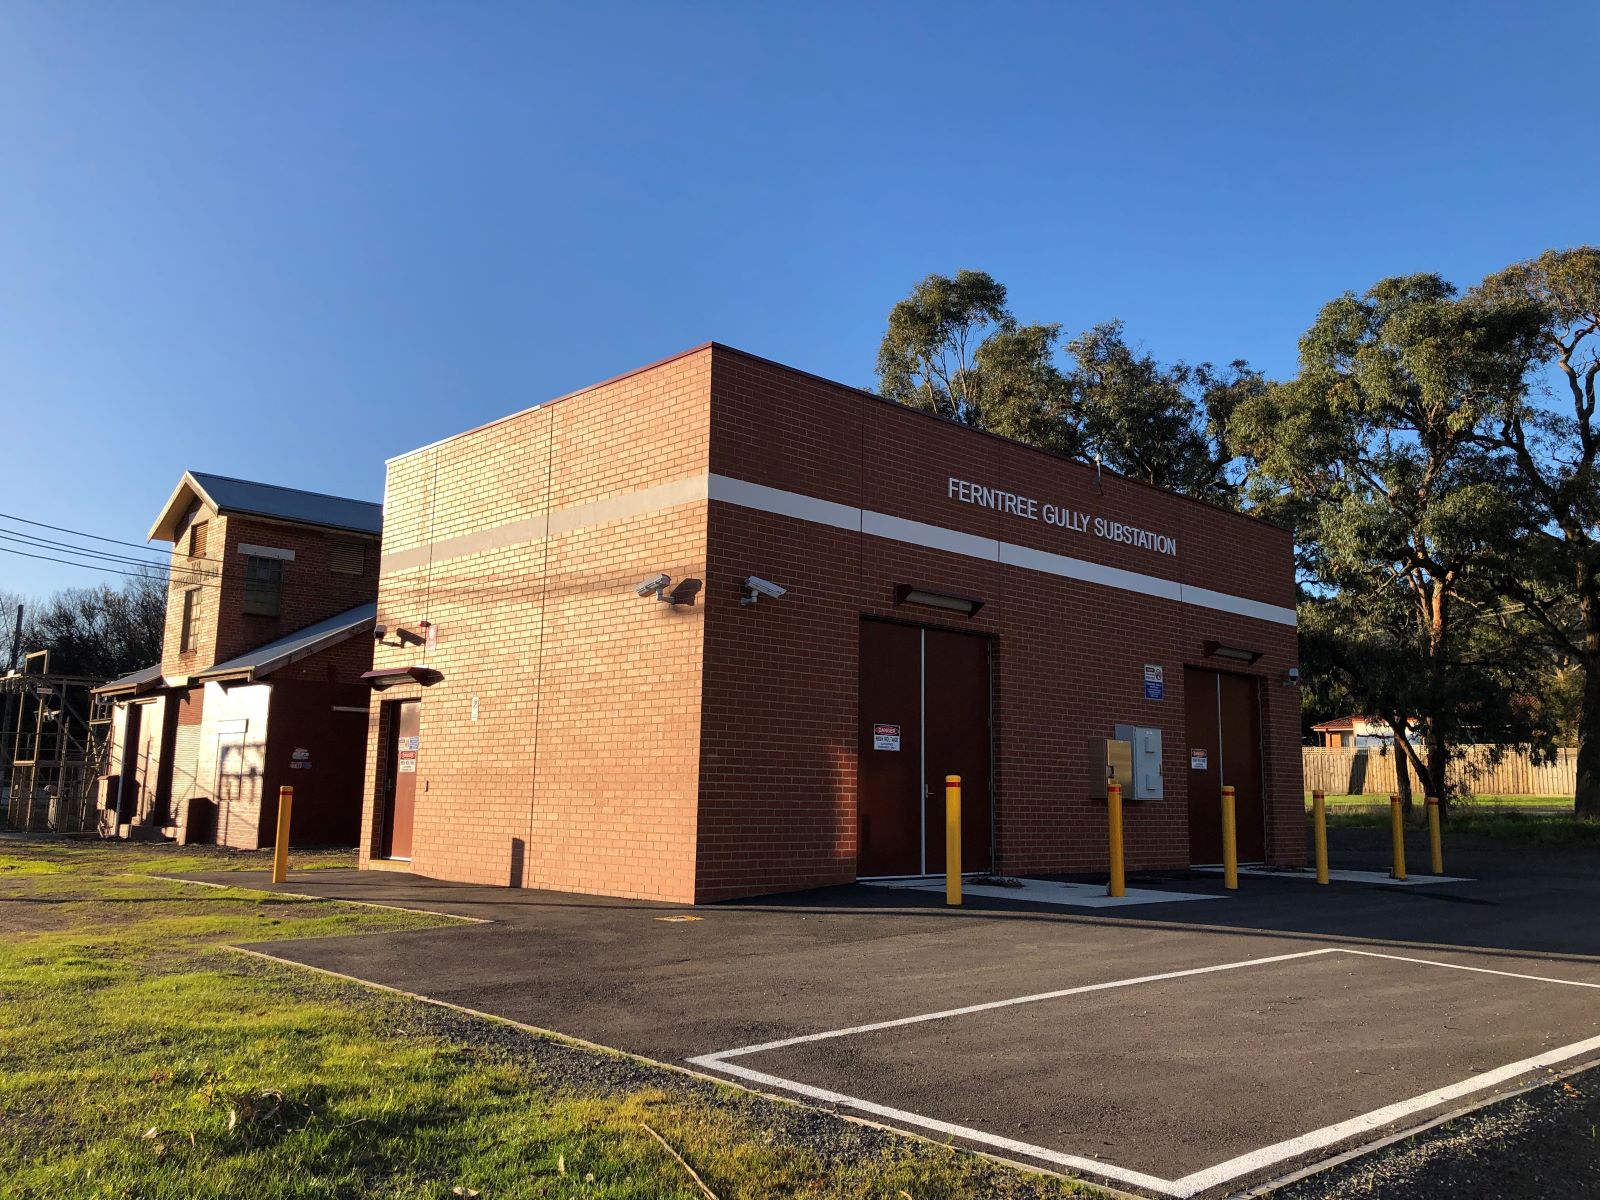 Ferntree Gully REFCL Substation